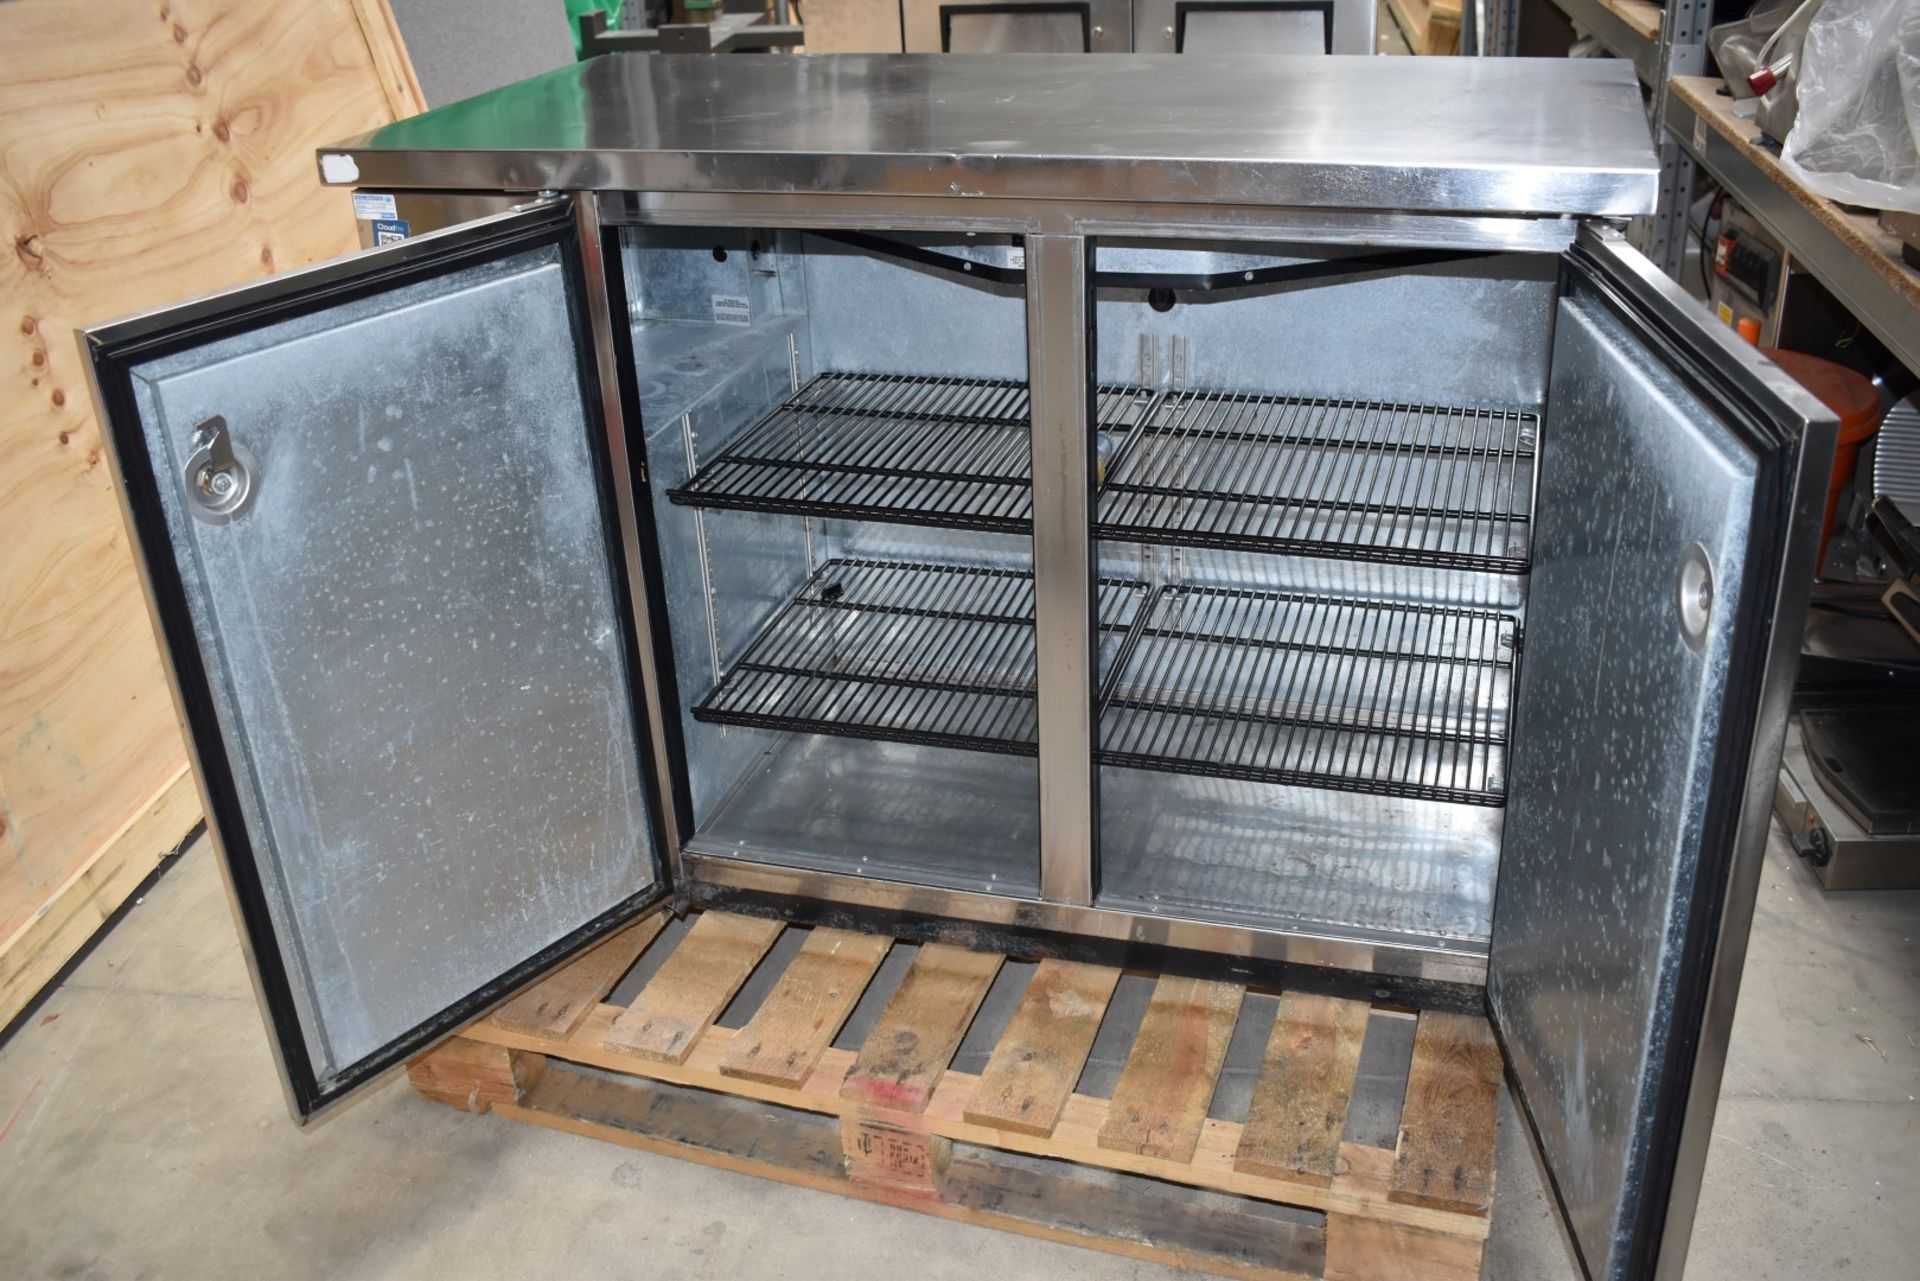 1 x True Back Bar Bottle Cooler With Solid Stainless Steel Doors and Counter Top - Model TBB-24-48-S - Image 7 of 11